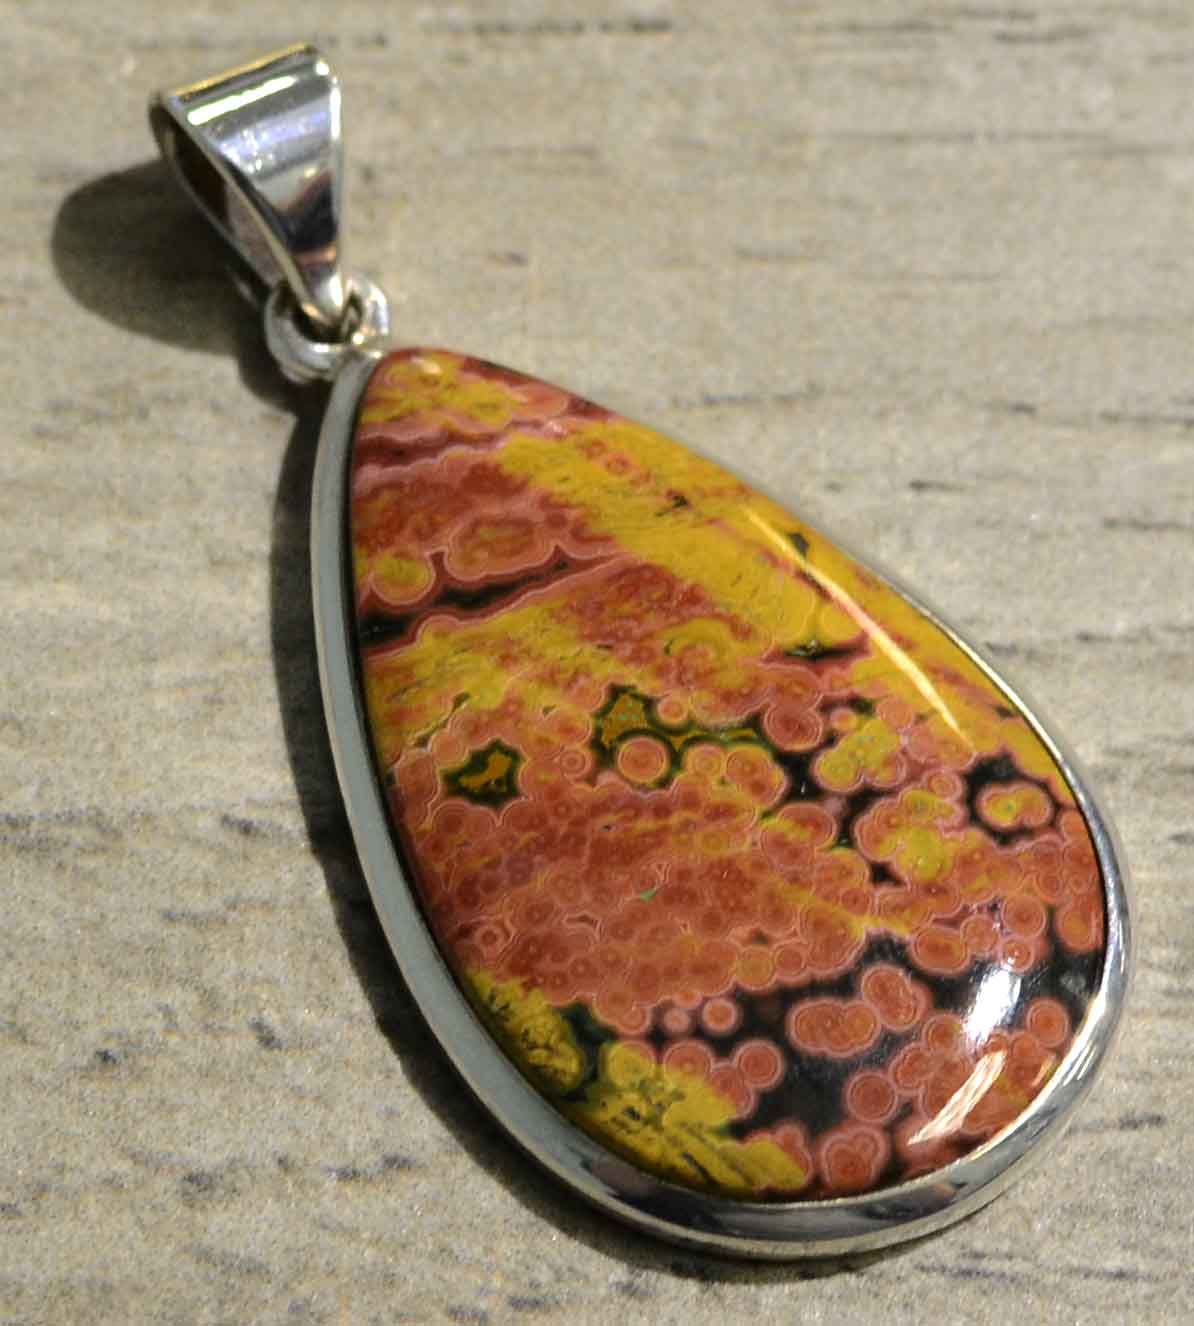 Orange and yellow ocean jasper and sterling silver pendant